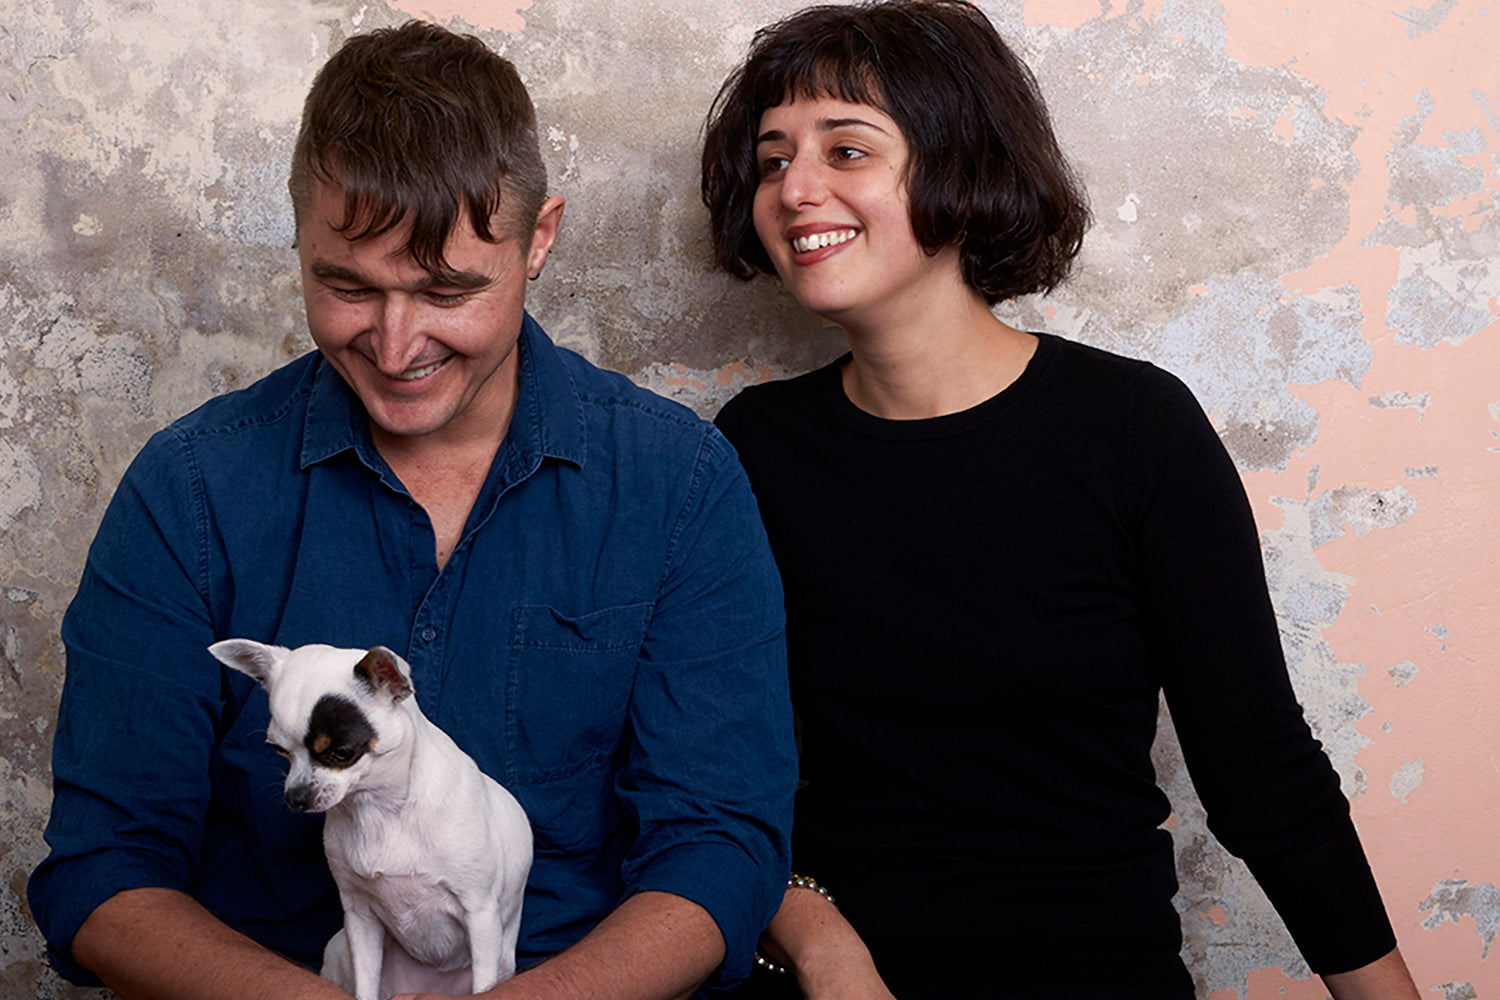 A man and woman both sitting on the ground with a chihuahua, all seated in front of a wall covered in crumbly peach plaster.